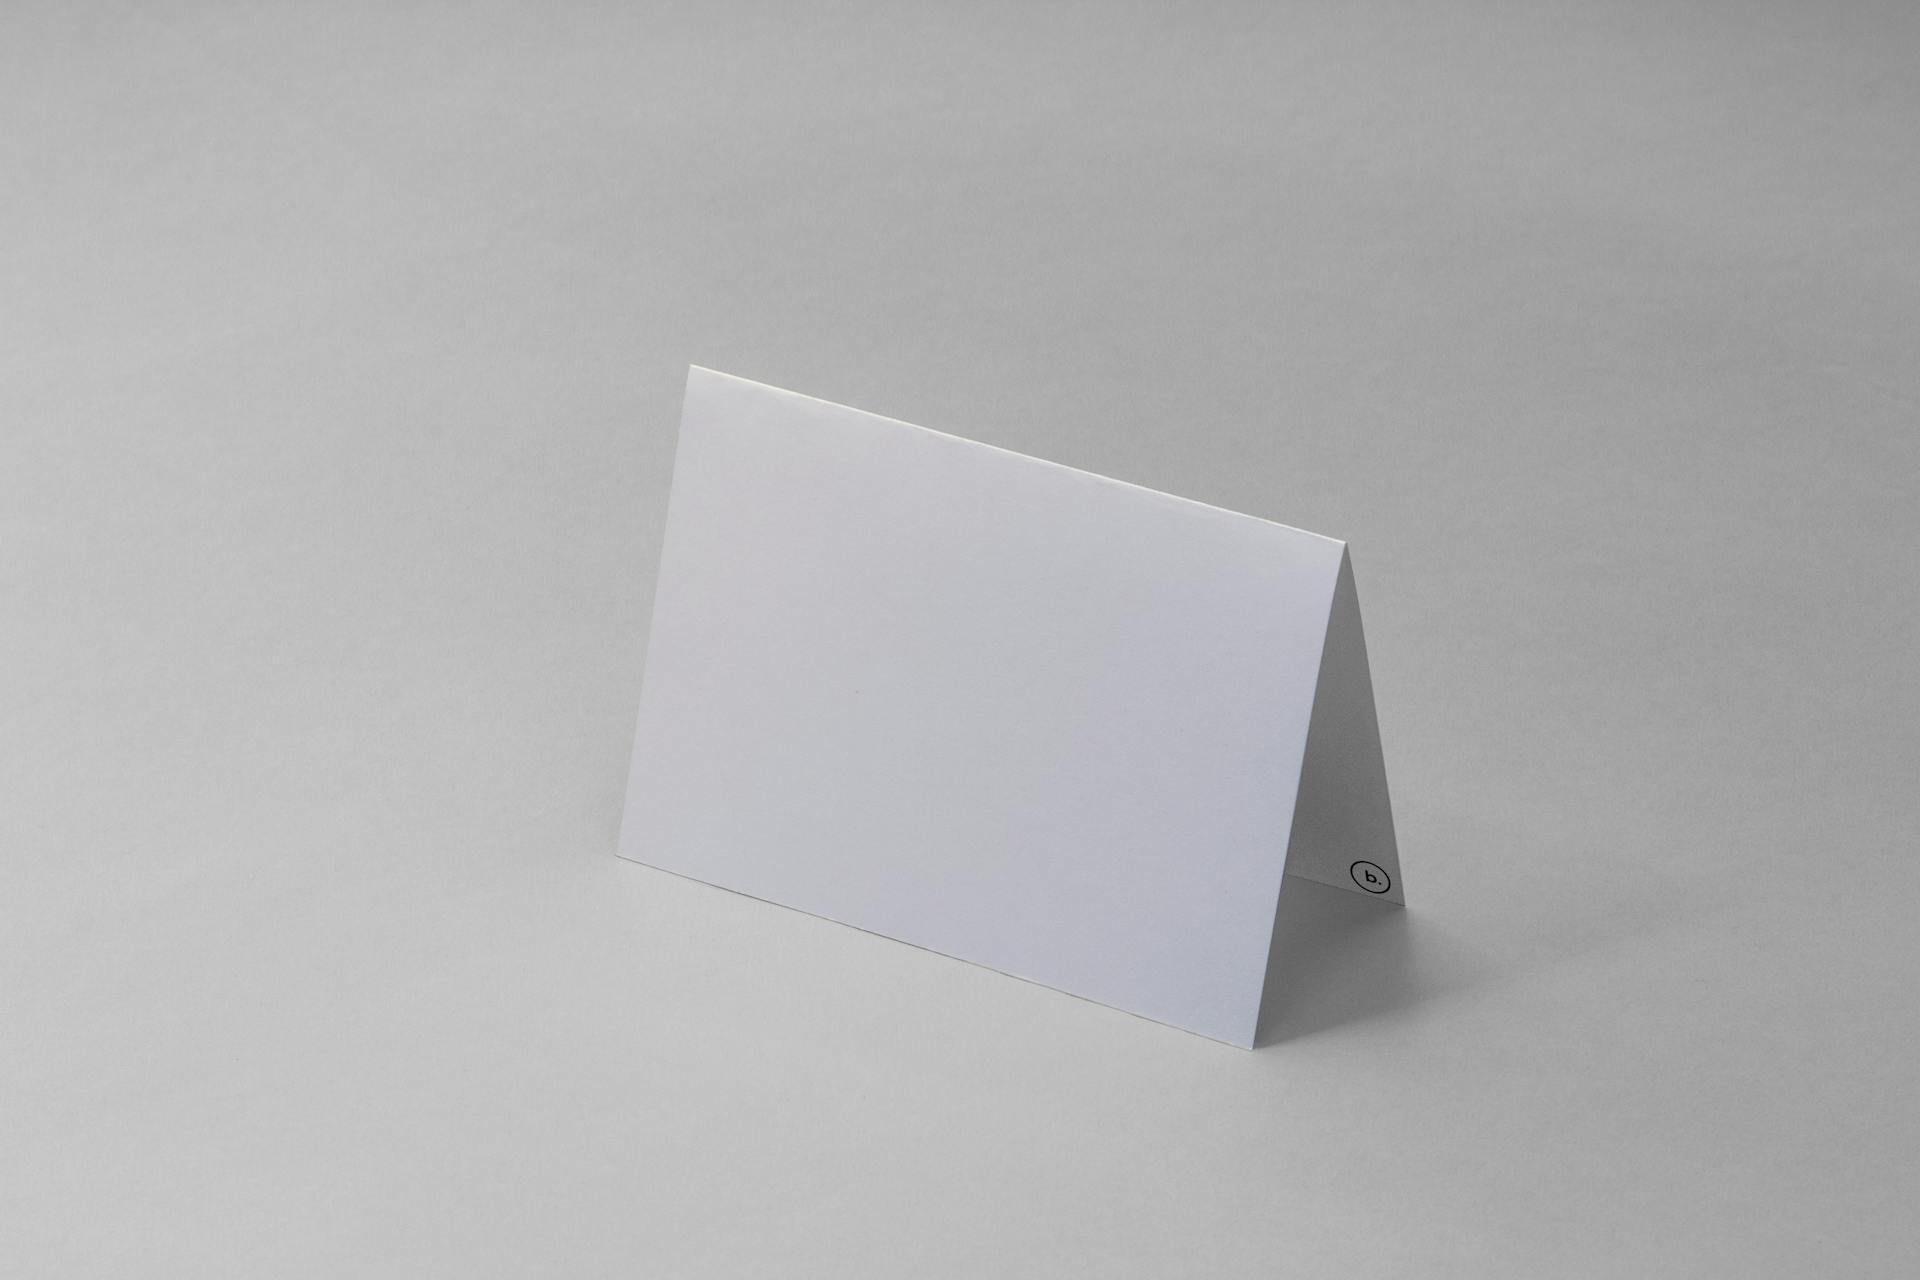 Folded white paper | Source: Pexels